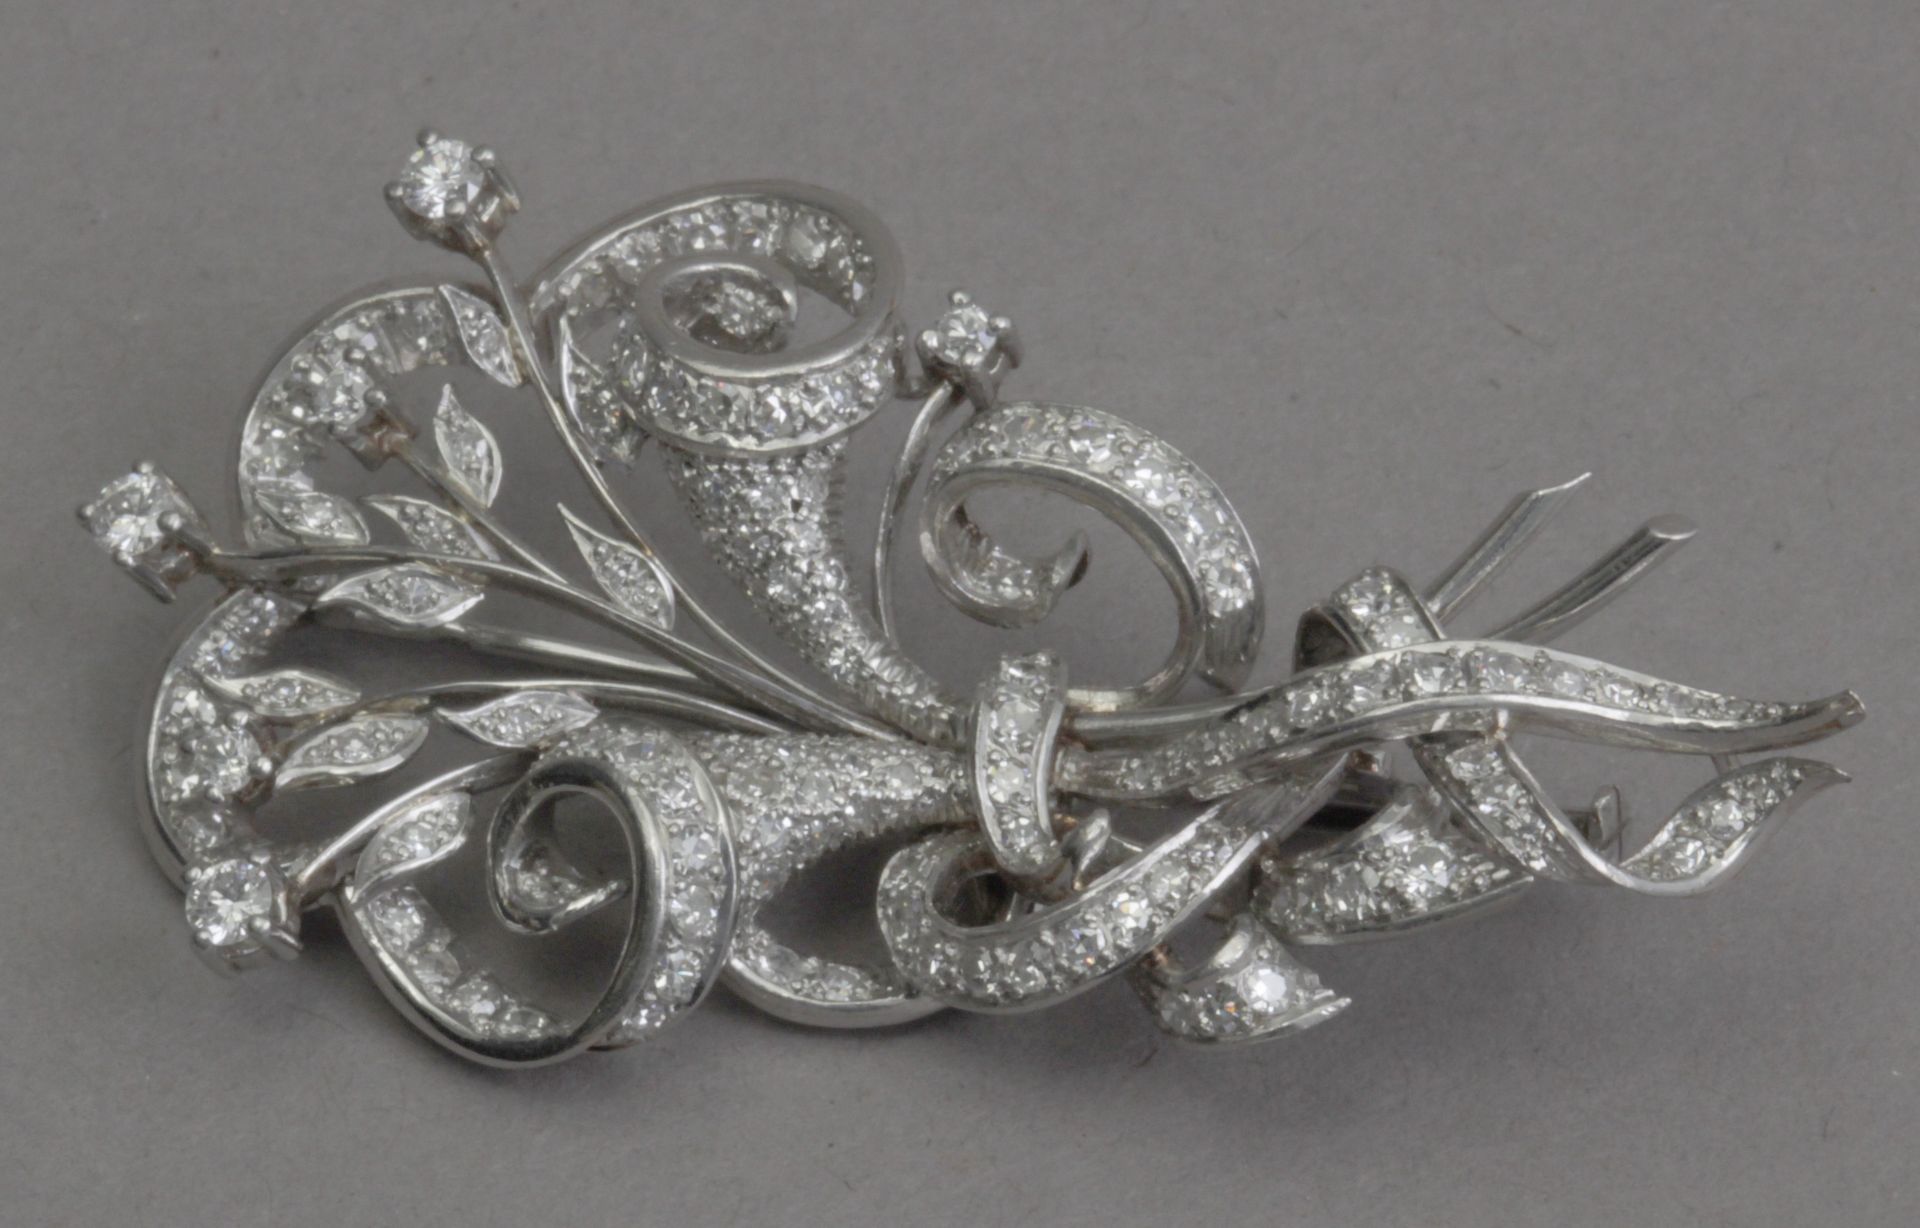 A second third of 20th century diamond brooch in a platinum setting